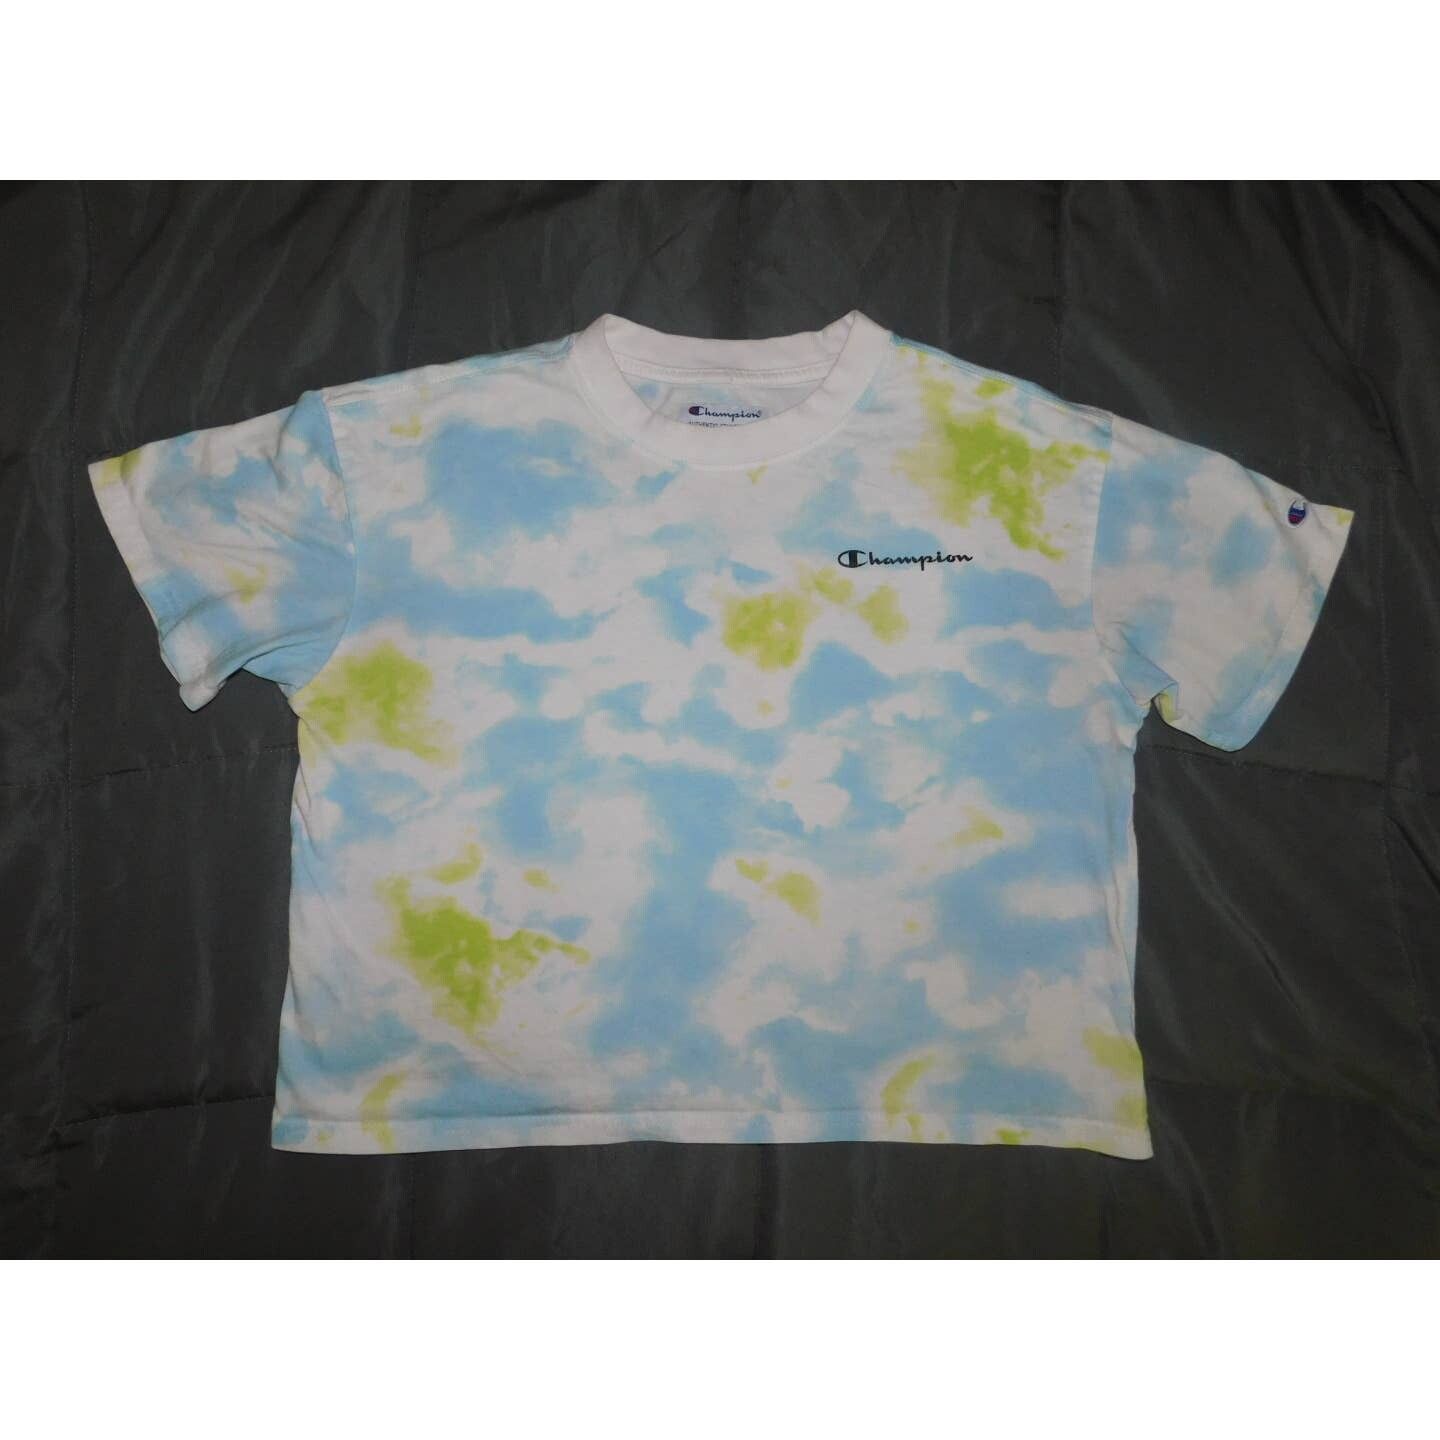 Champion Champion Womens Tie Dye Tee T-Shirt Size S / US 4 / IT 40 - 1 Preview